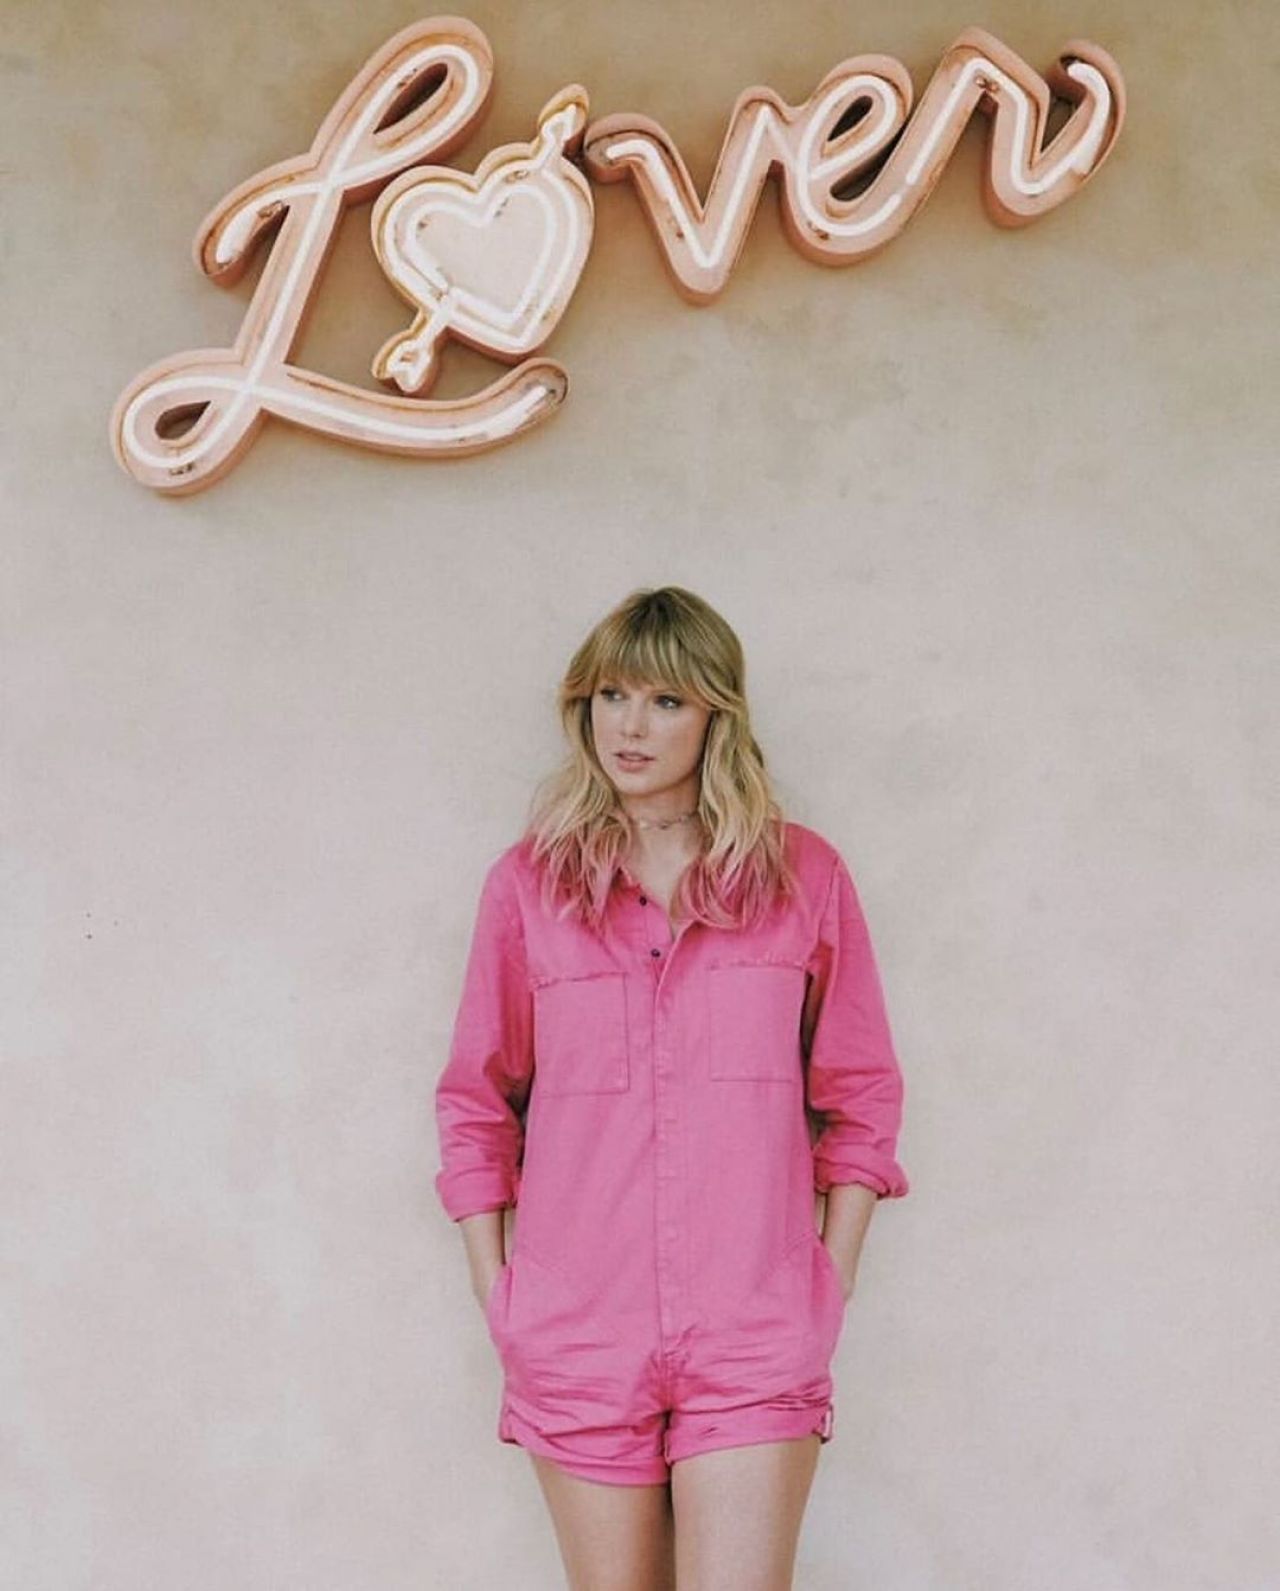 Taylor Swift – Photoshoot for “Lover” Album 2019 (more photos)1280 x 1591